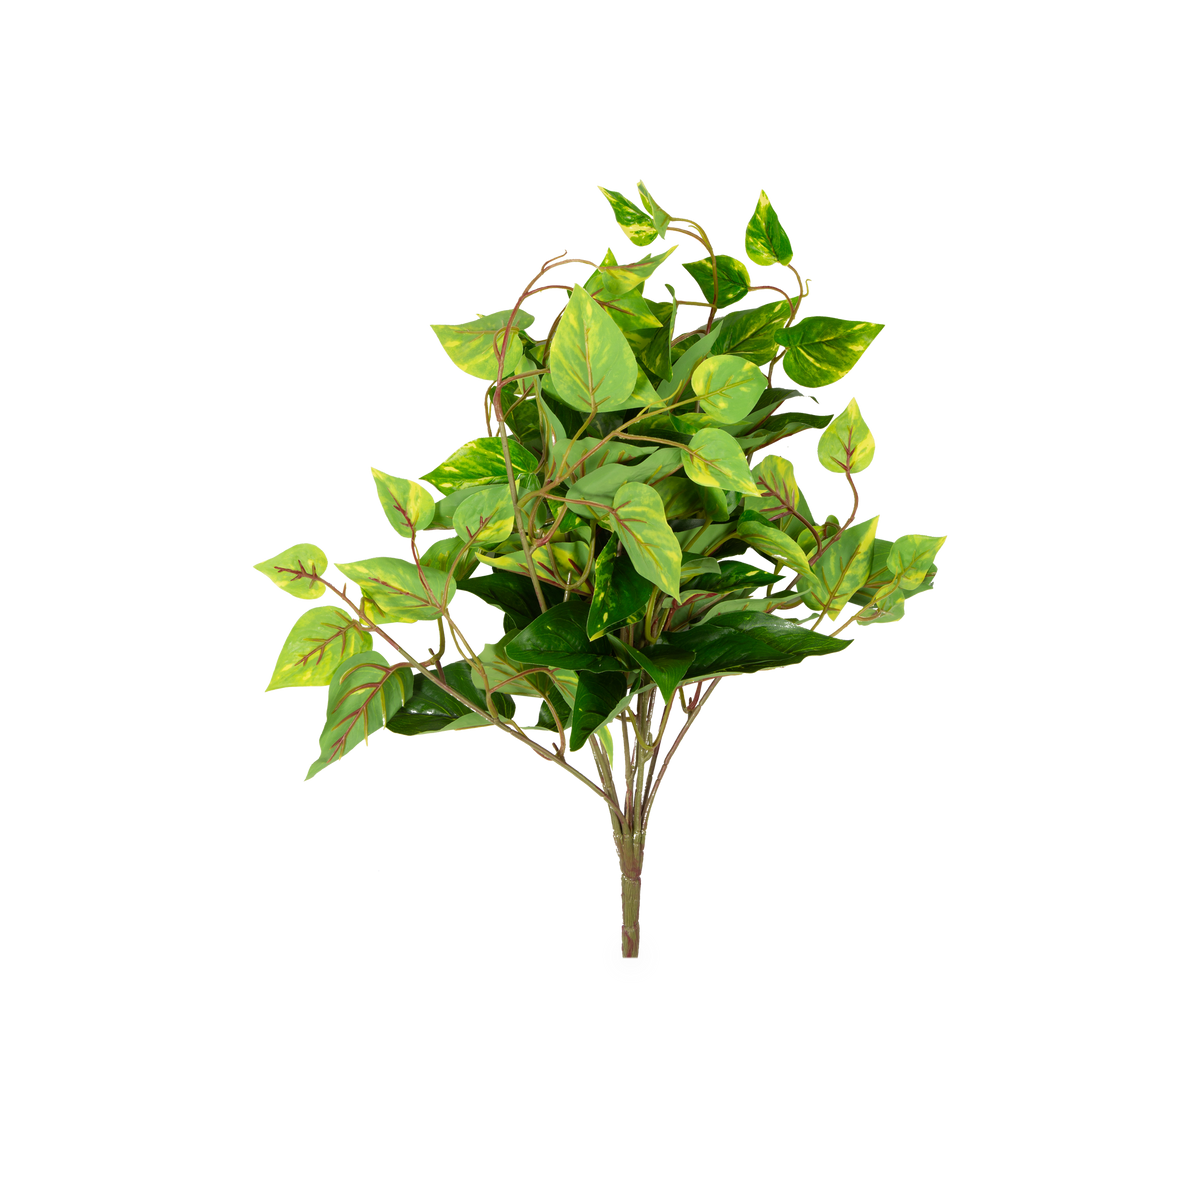 This Pathos Hanging Bush adds a touch of refreshing nature to your space.